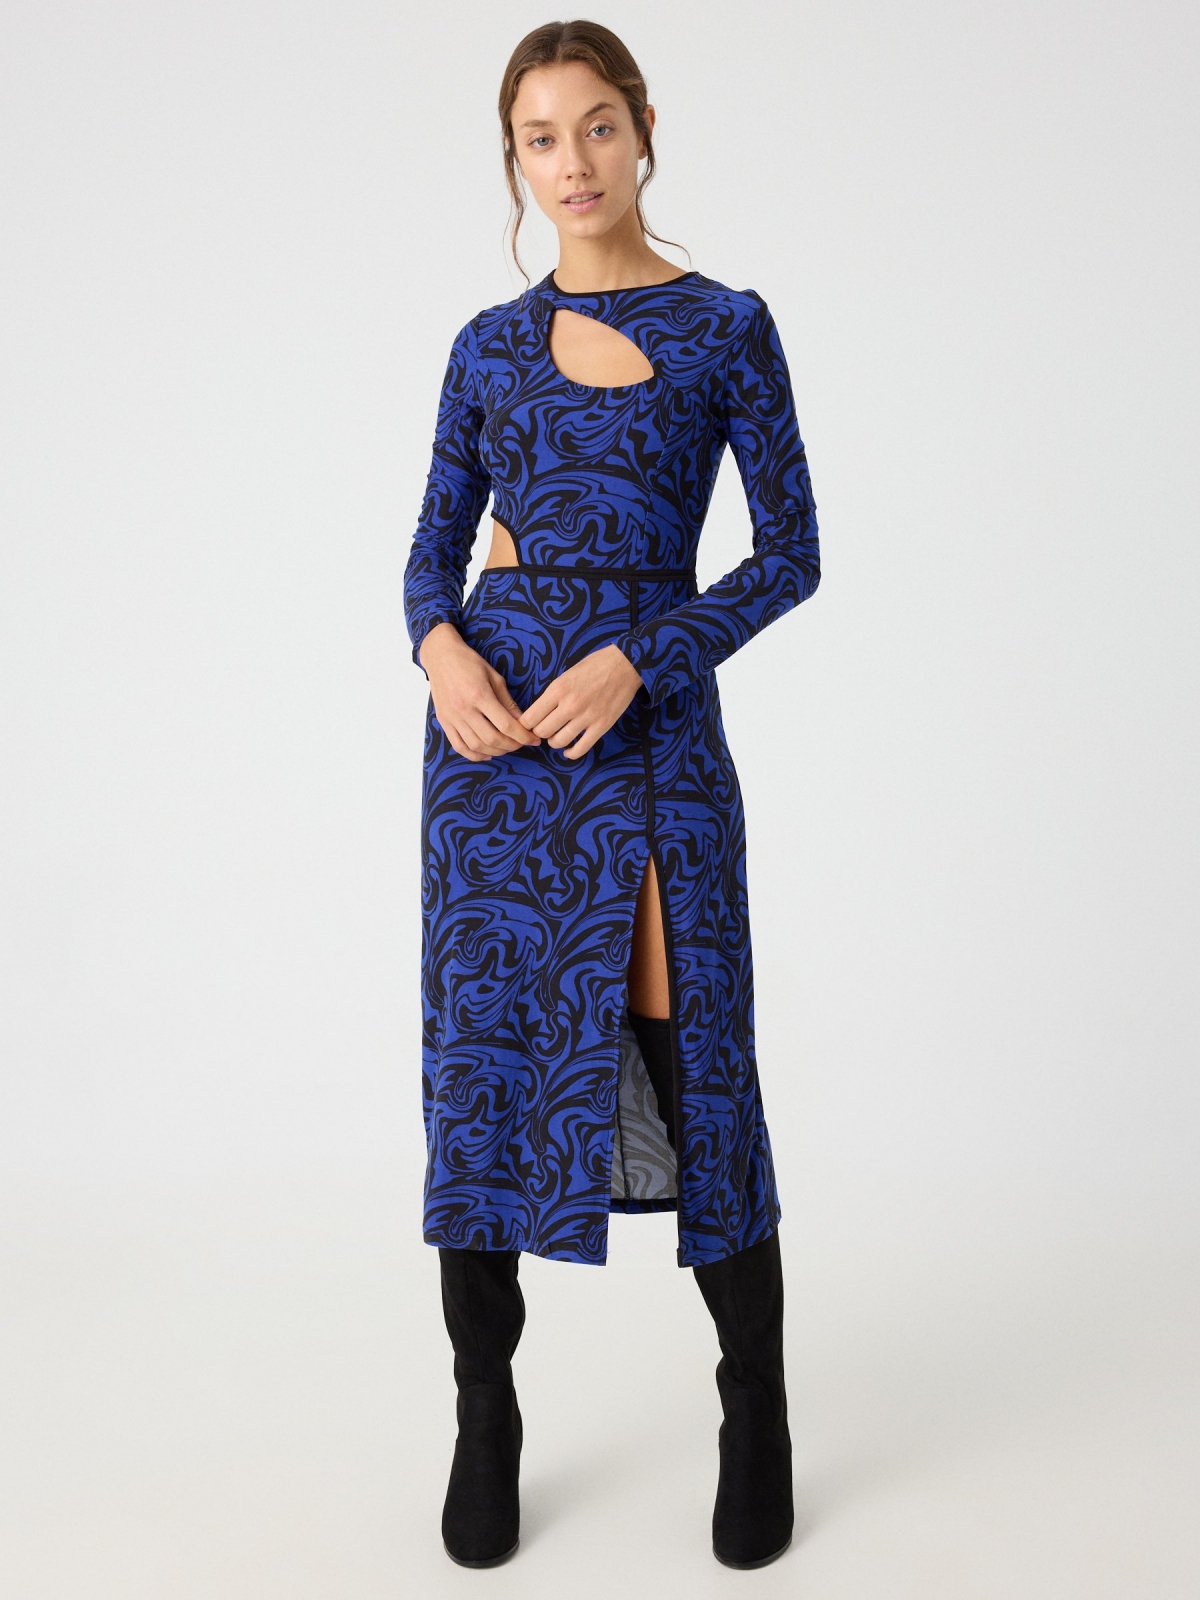 Psychedelic print cut out midi dress dark blue front view